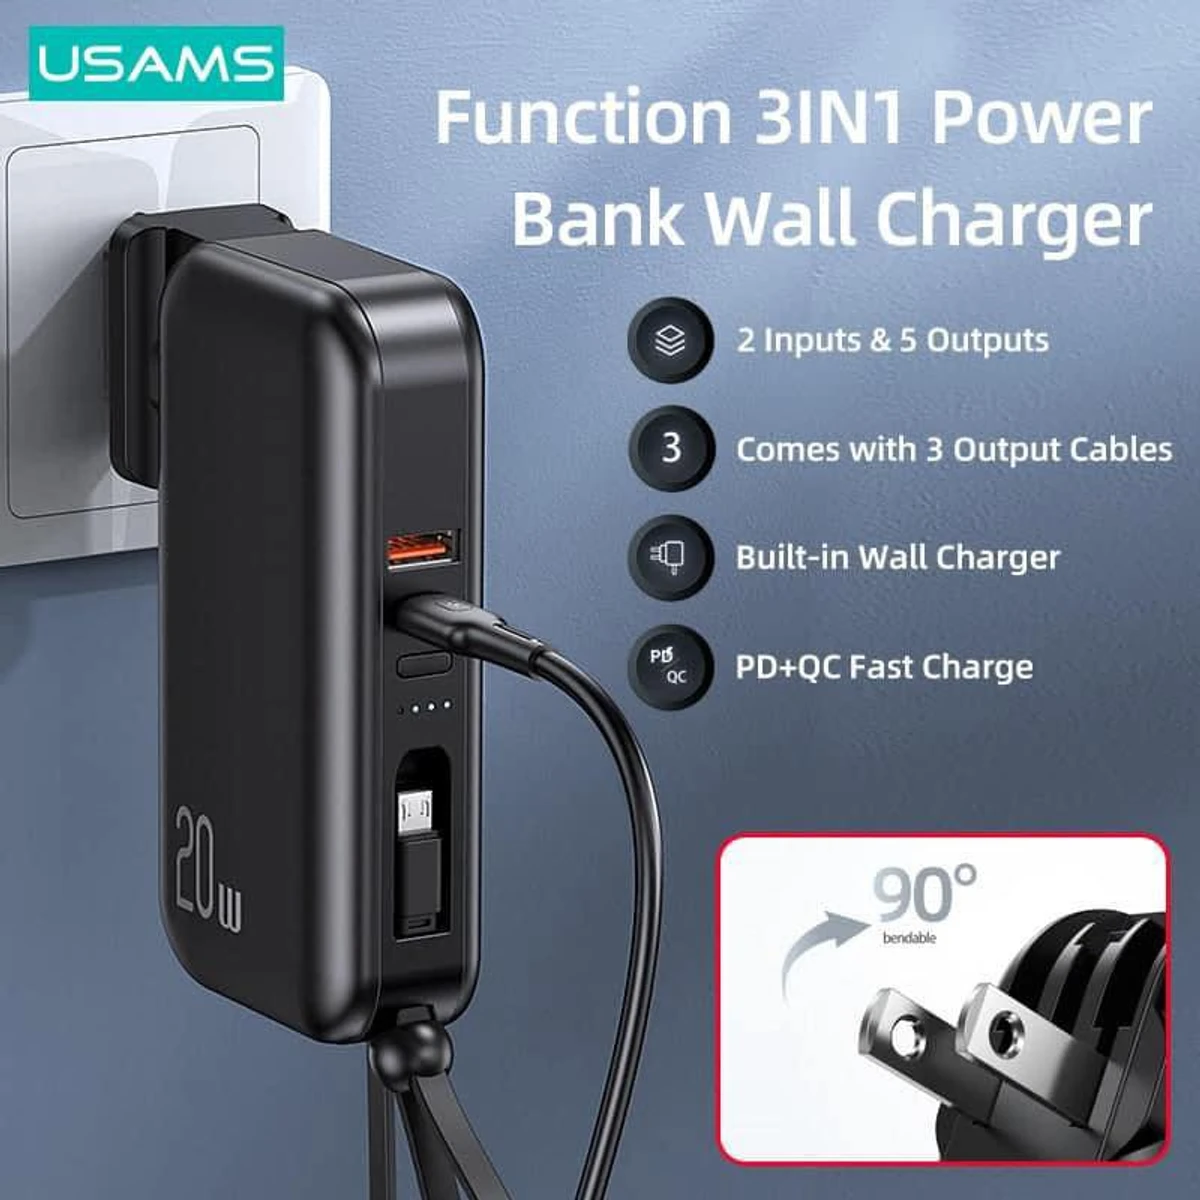 USAMS Power Bank 10000mAh With 20W PD Fast Charging Powerbank 3 In 1 Wall Charger With Cables US EU Plug For iPhone Samsung Huawei Phone